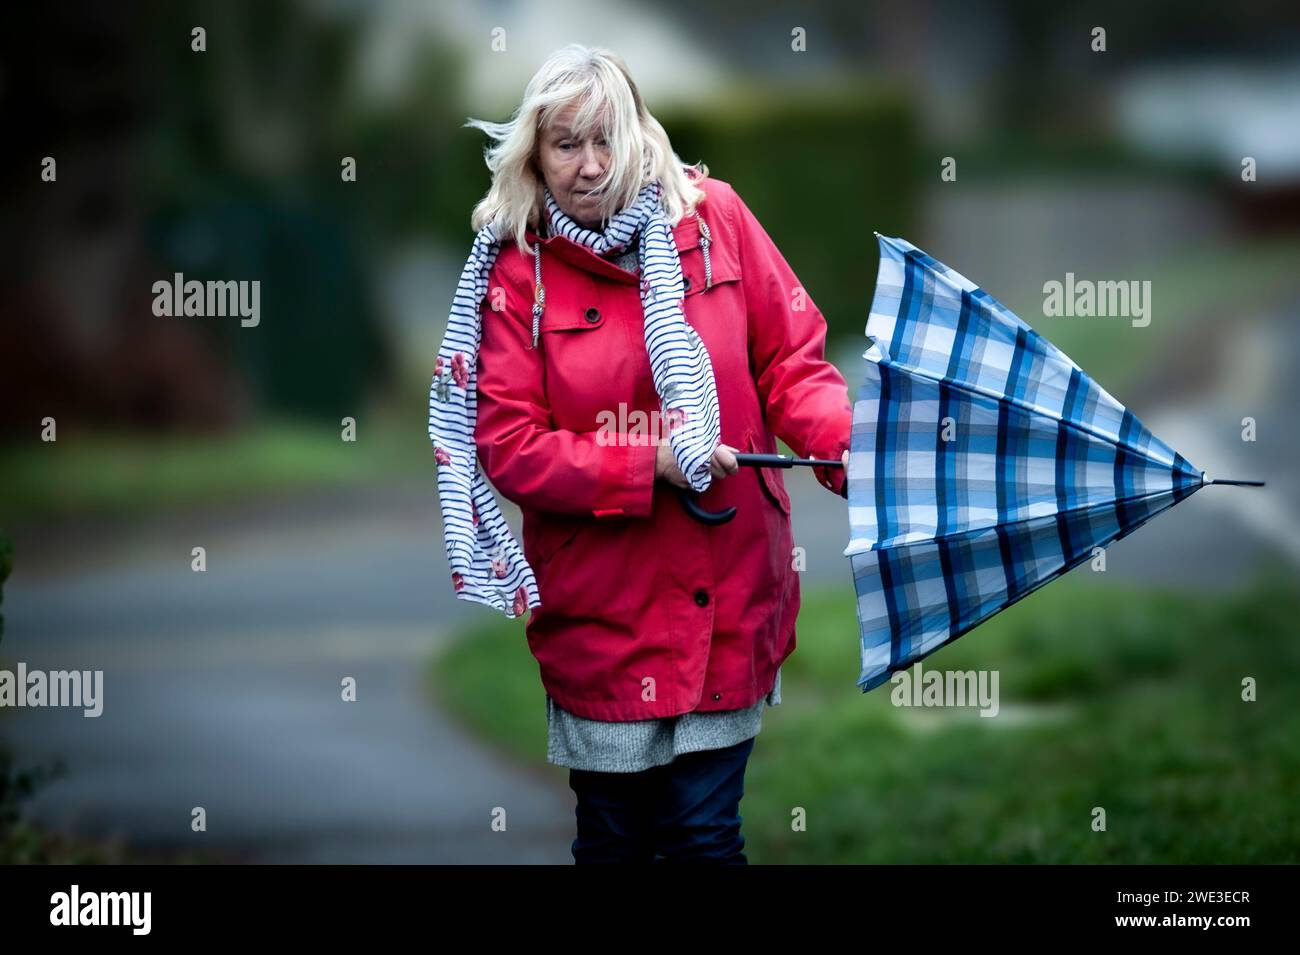 Woman in a red coat with a blue umbrella on a windy stormy day, UK Stock Photo